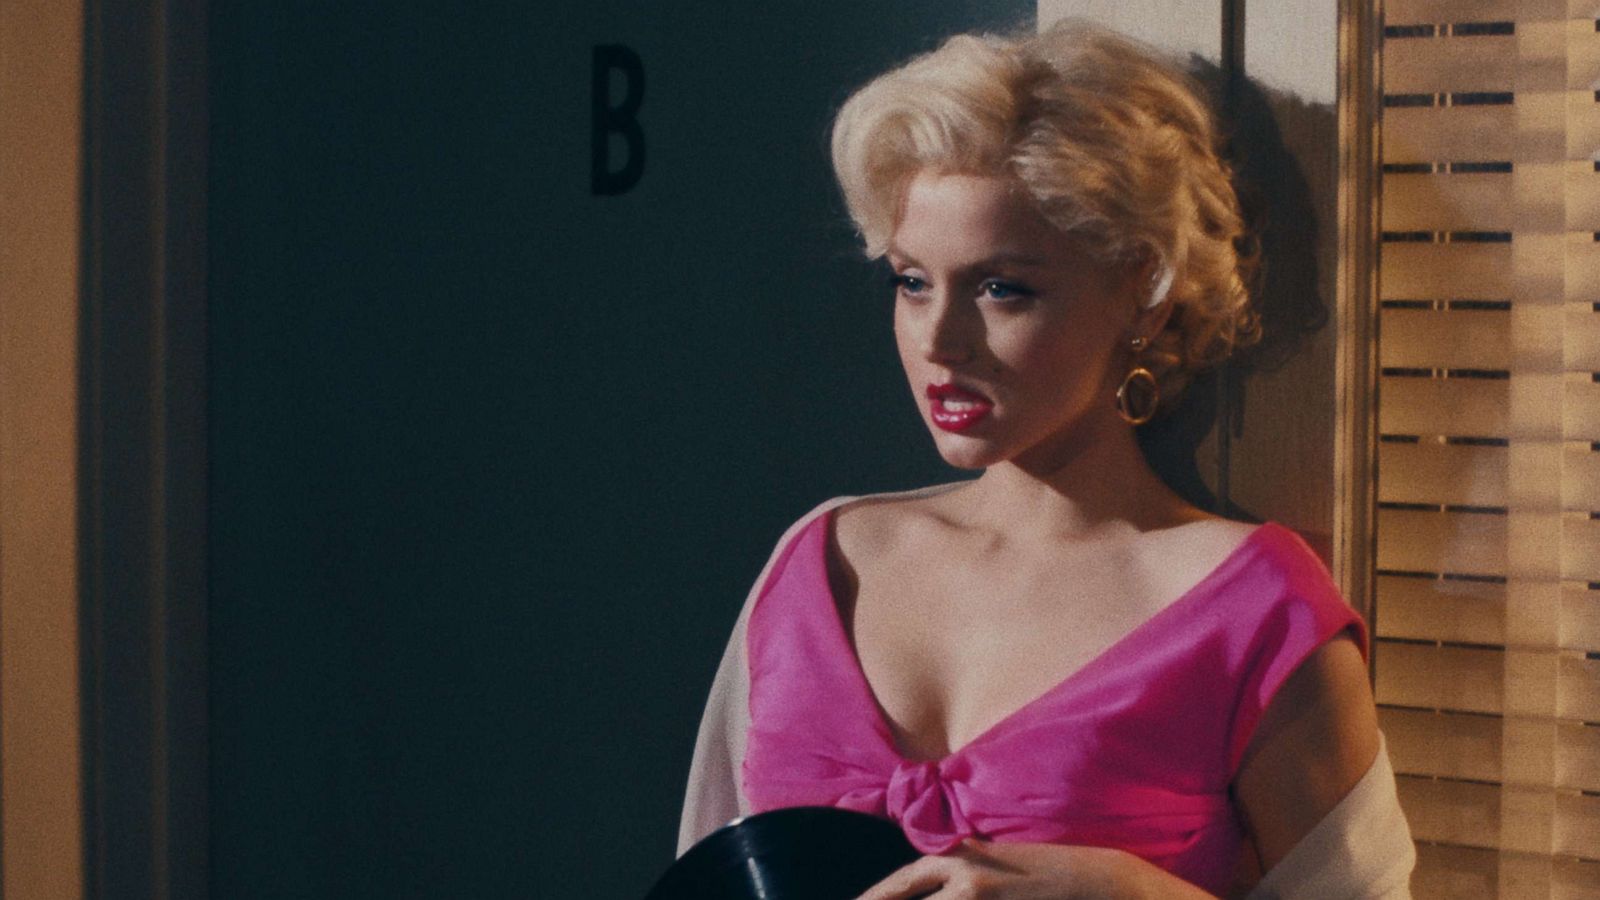 Blonde review: A nightmarish, unsettling reimagining of Marilyn Monroe's  life